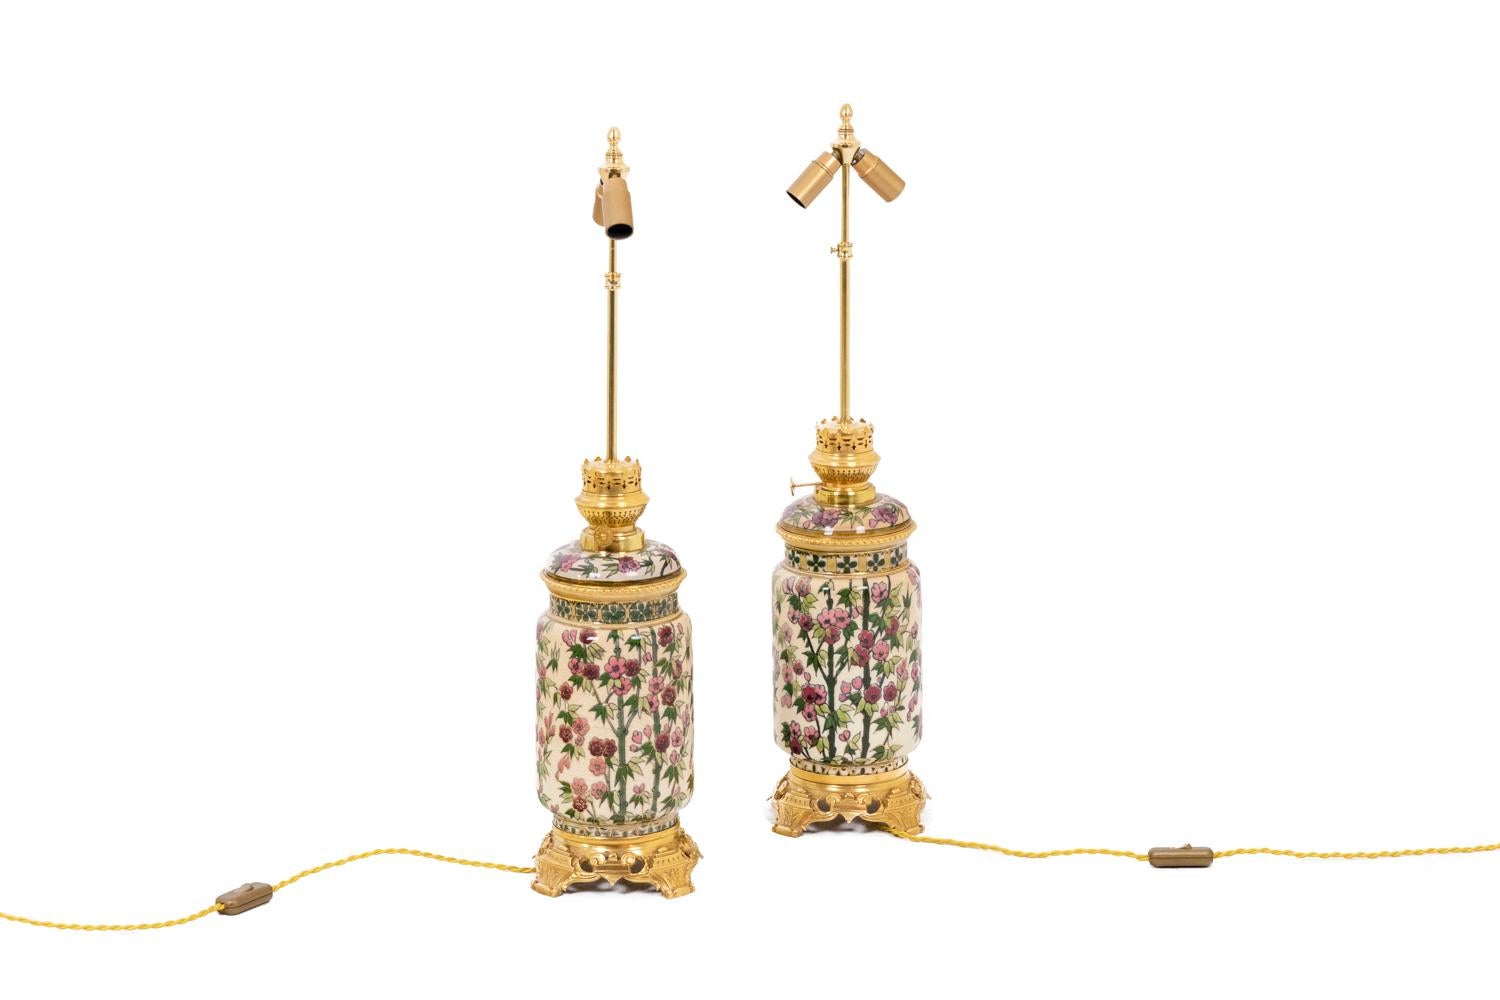 Pair of lamps in enamelled earthenware, ovoid in shape and adorned with branches and cherry blossoms, green and pink on a white background. Frame in chased and gilded bronze. Quadripod base. One of the two lamps is signed Kosmos Brenner on the